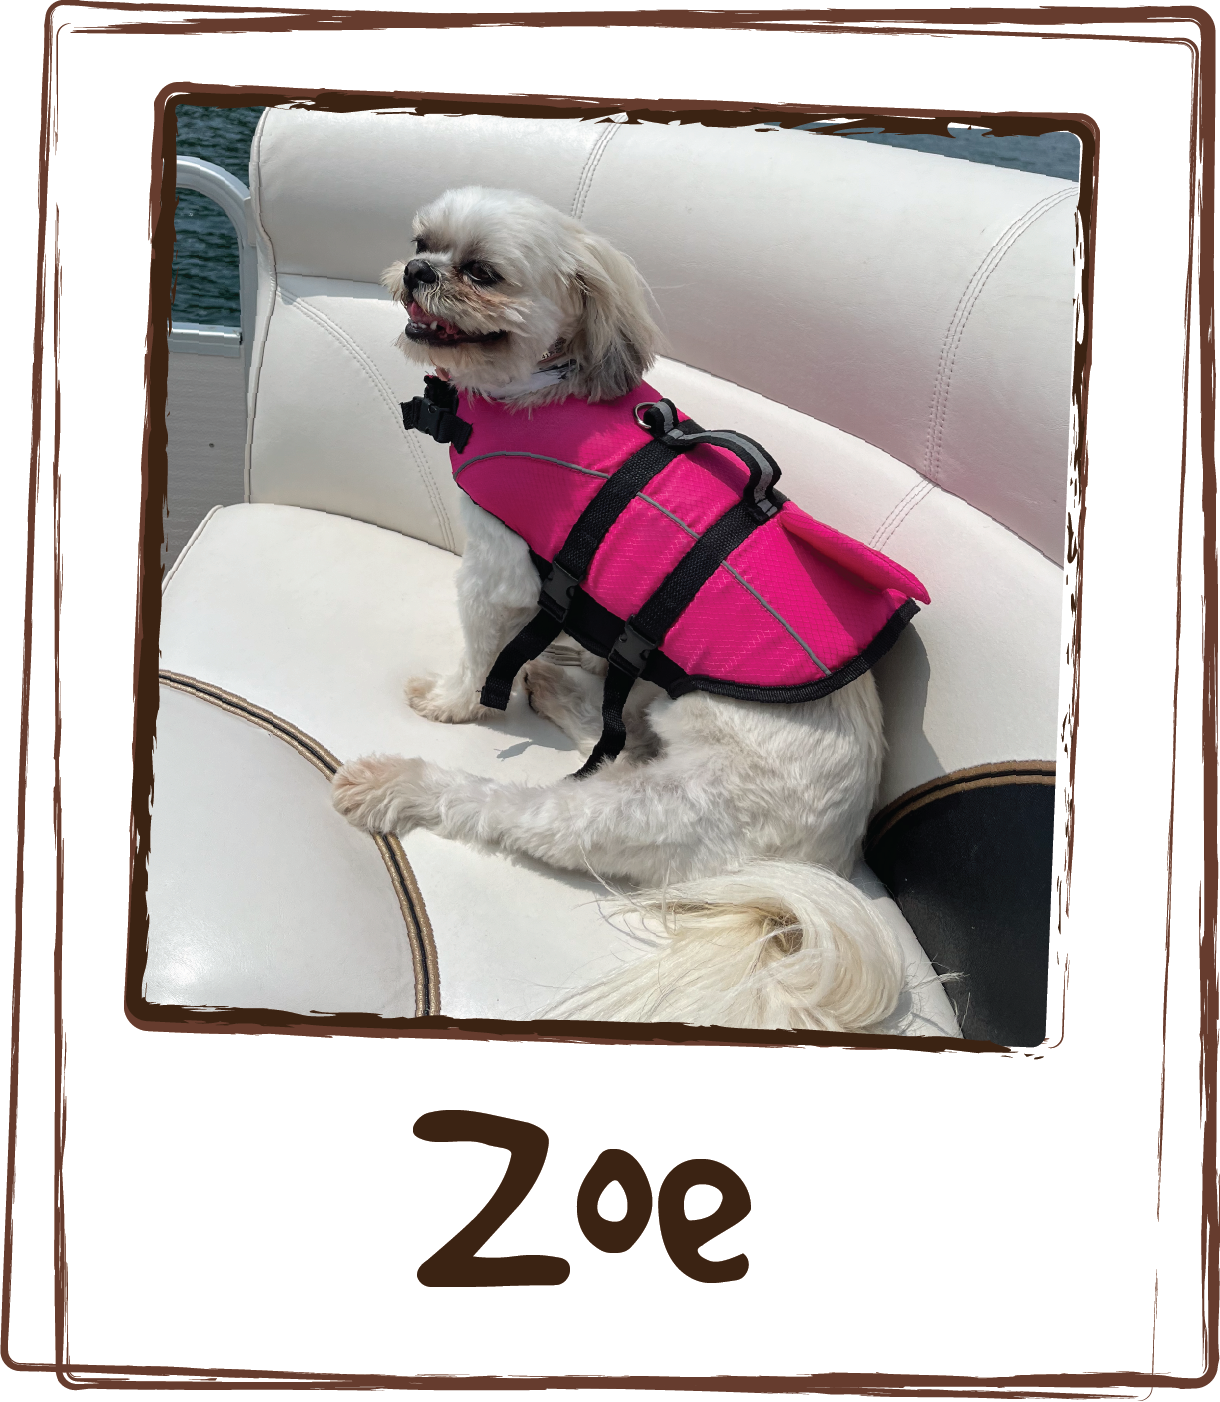  “(ZEN Calming Aid) really helps calm Zoe down, she is very afraid of storms and fire crackers!”  